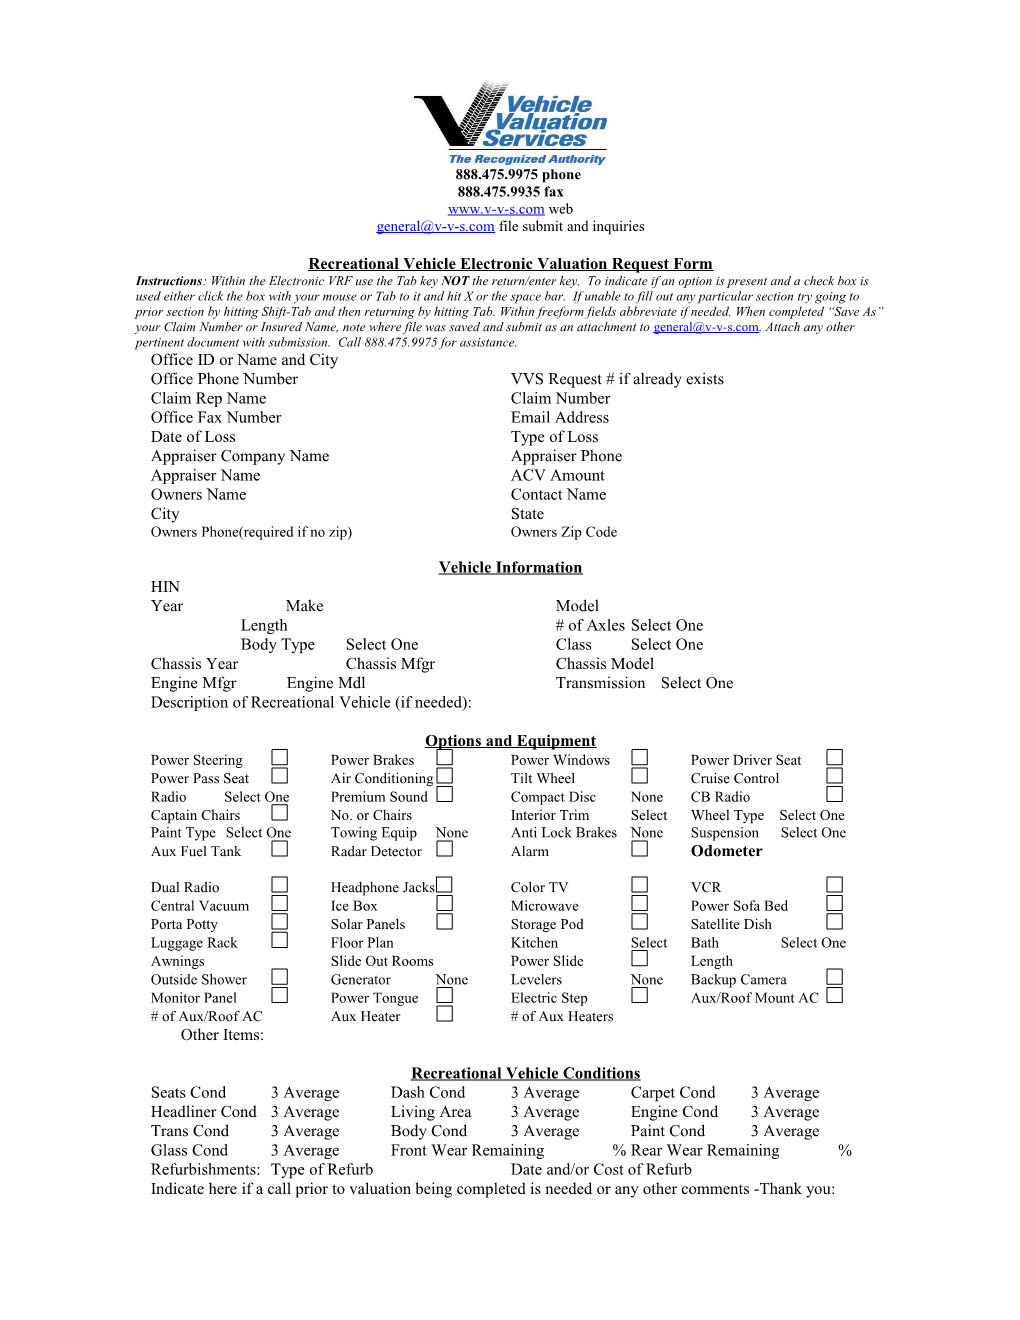 Recreational Vehicle Electronic Valuation Request Form